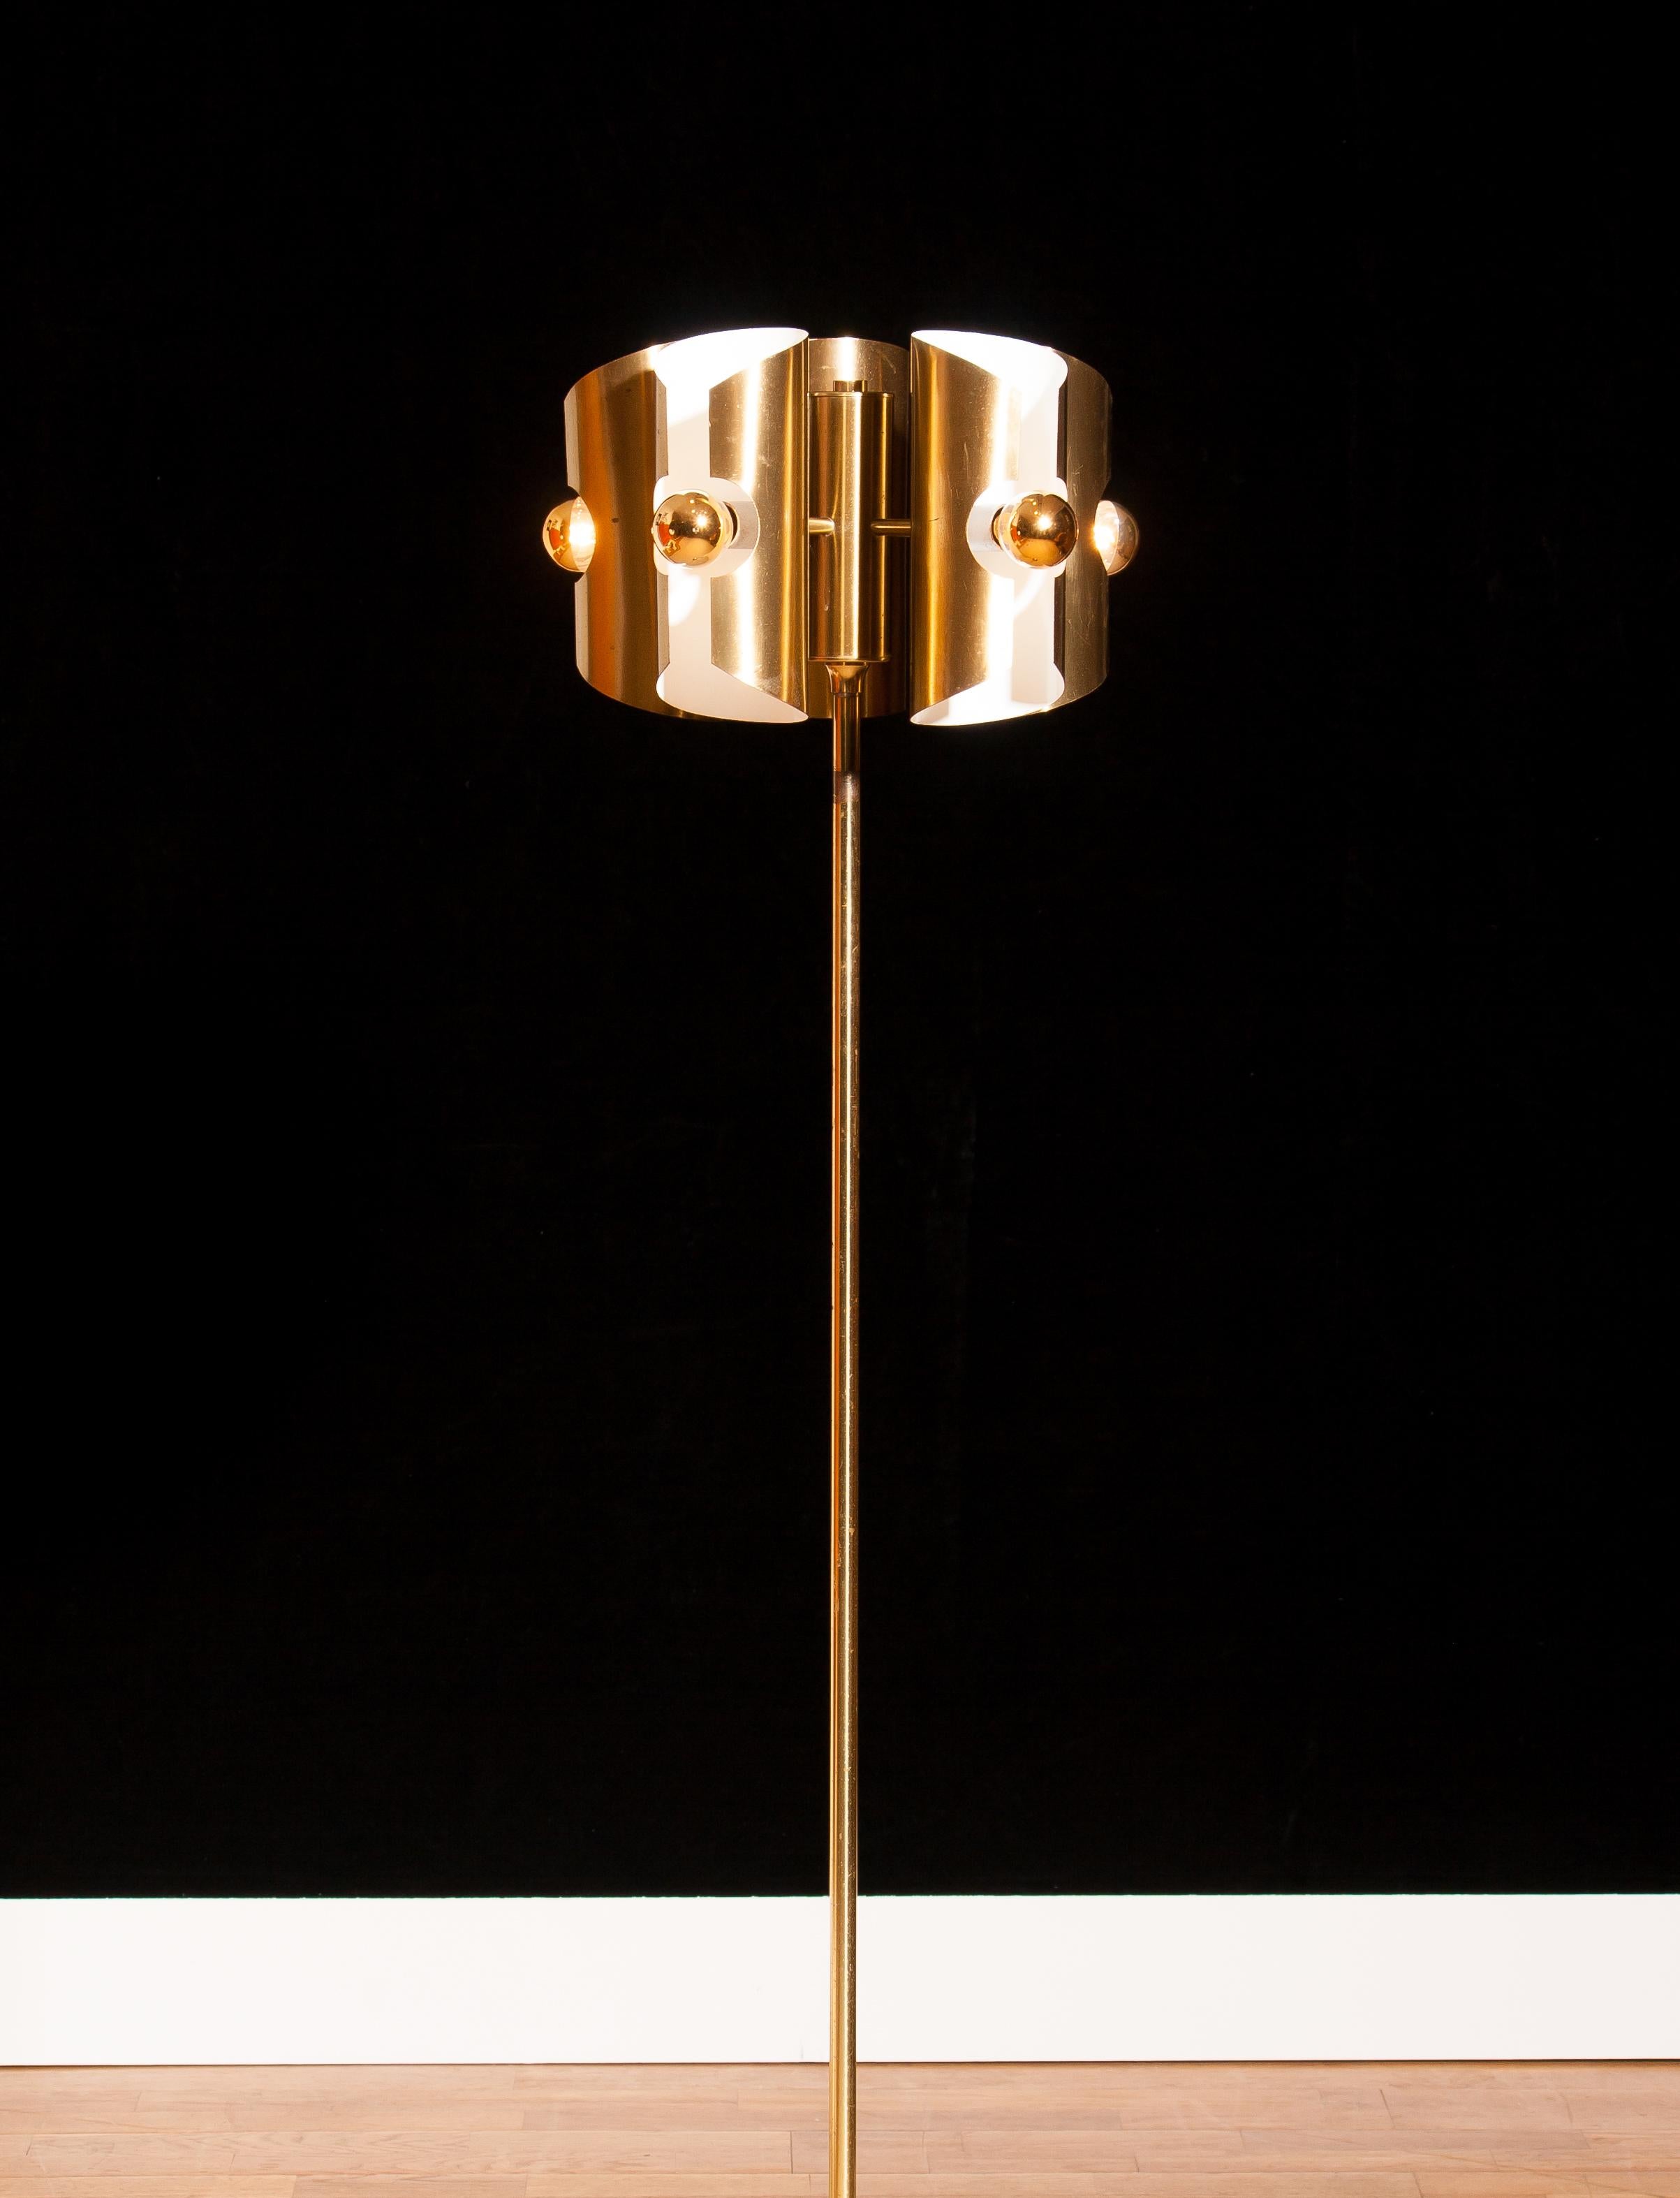 Metal 1960 Italian Brass Floor Lamp with Five Brushed Brass Shades